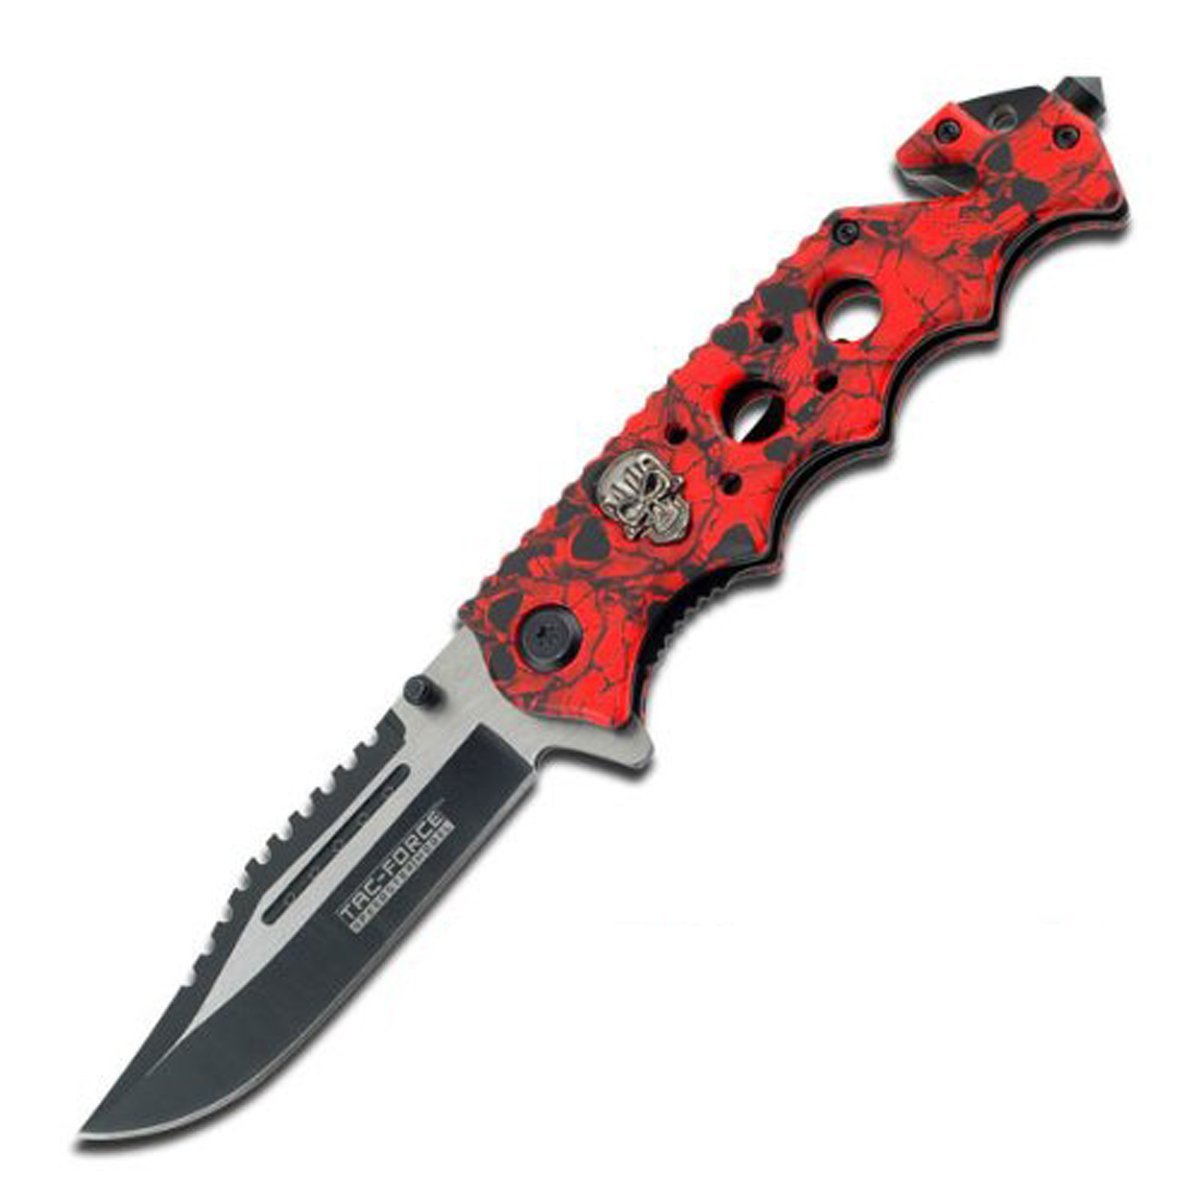 Tac Force Assisted Opening Rescue Glass Breaker Bright Red Skull Design Hunting Camping Tatical Pocket Knife